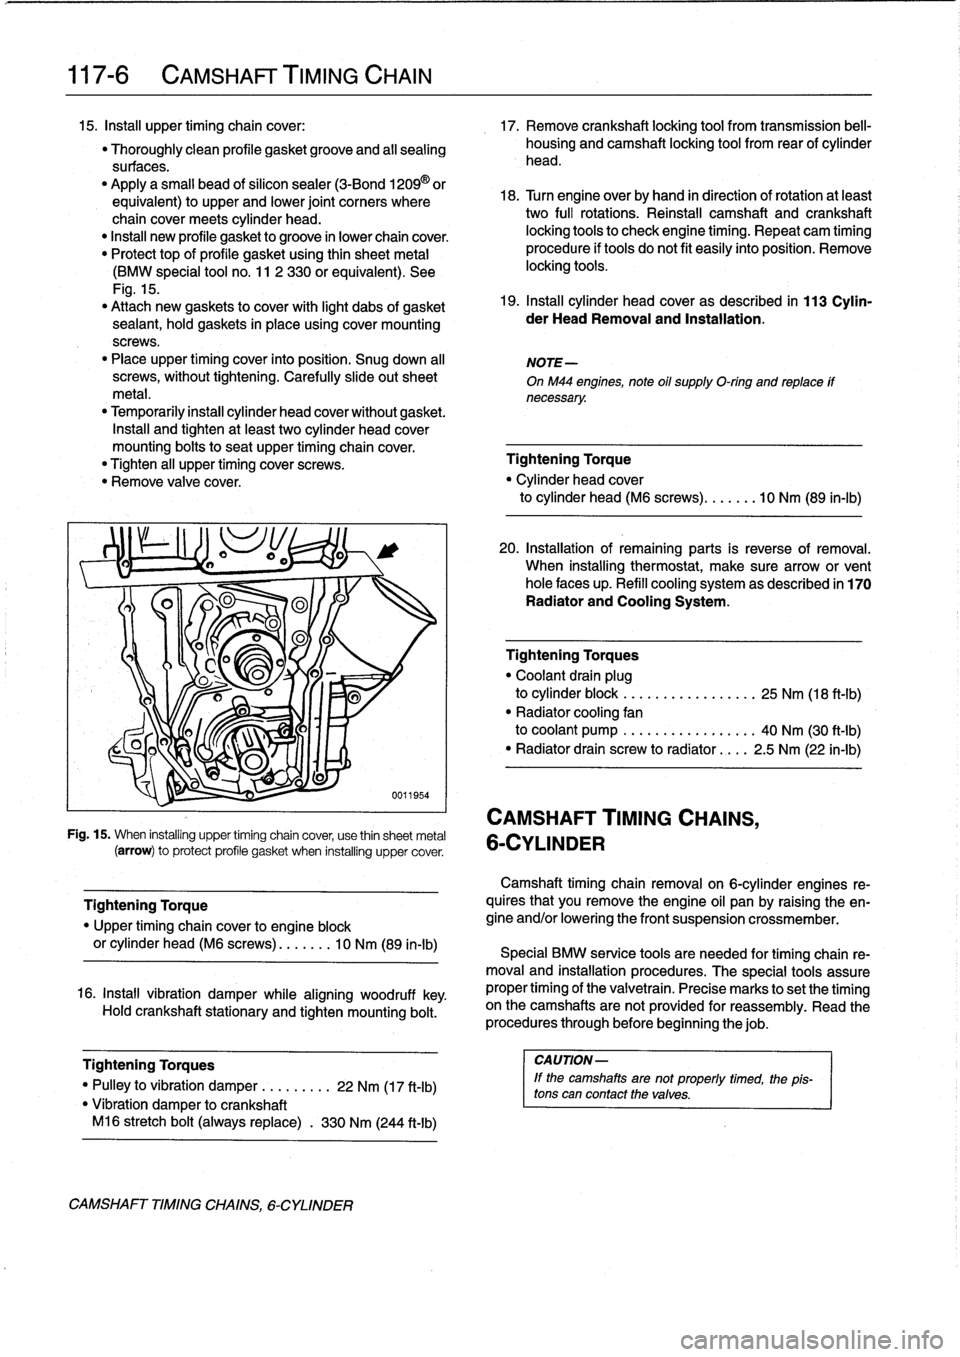 BMW 323i 1998 E36 Workshop Manual 
117-
6

	

CAMSHAFT
TIMING
CHAIN

15
.
Insta¡¡
upper
timing
chaincover
:

	

17
.
Remove
crankshaft
locking
tool
from
transmission
bell-

"
Thoroughly
clean
profile
gasketgroove
and
all
sealing

	
